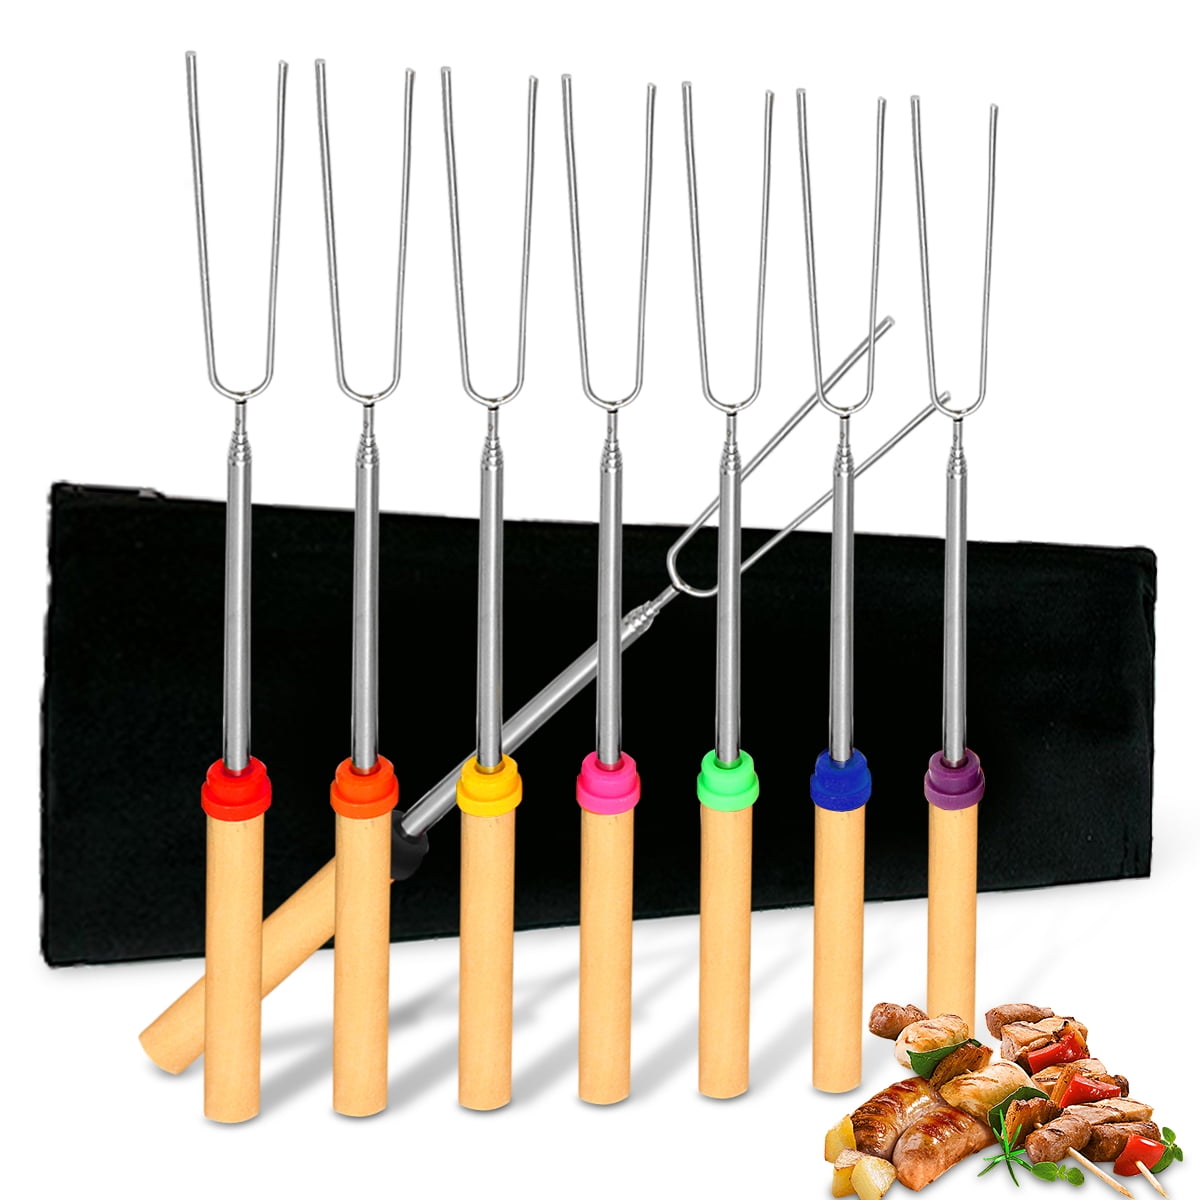 Campfire Smores and Hot Dog Skewers Set of 12 and Hiking Accessories BBQ Camping Marshmellow Roasting Sticks Fire Pit - Telescopic Extendable Forks 45 cm Extra Long 